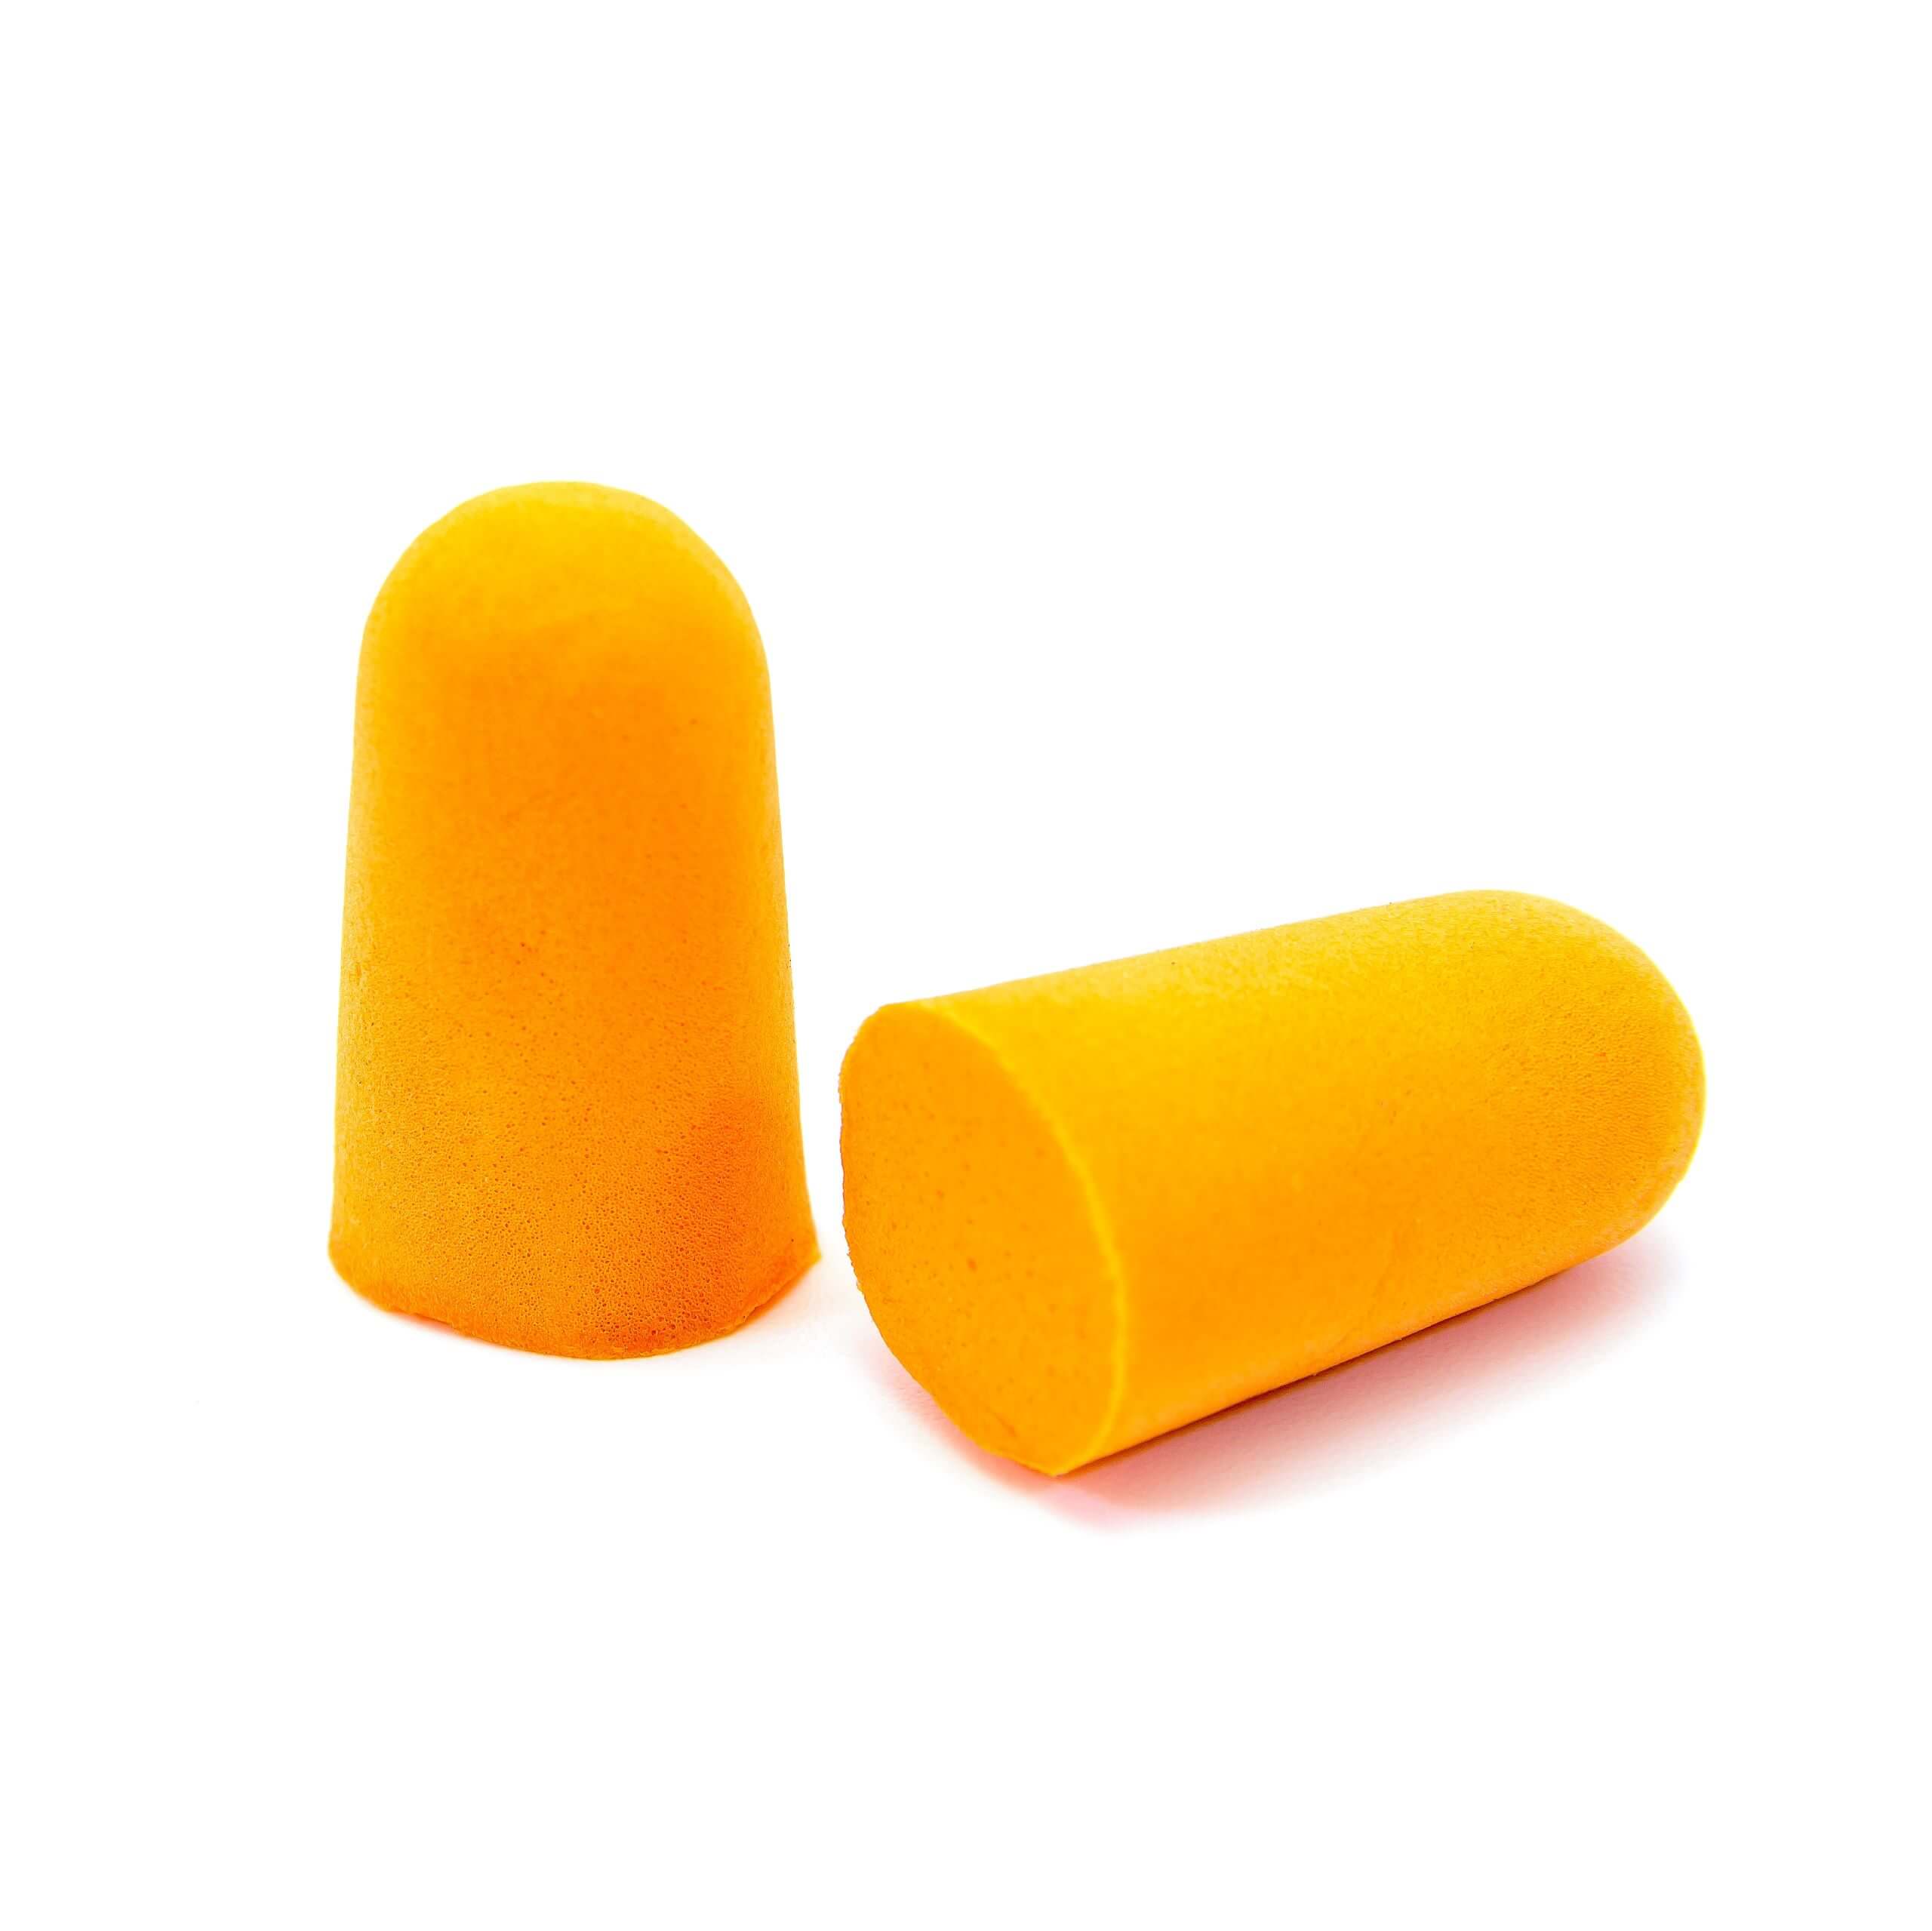 A close up image of our Industrial Ear Plugs.